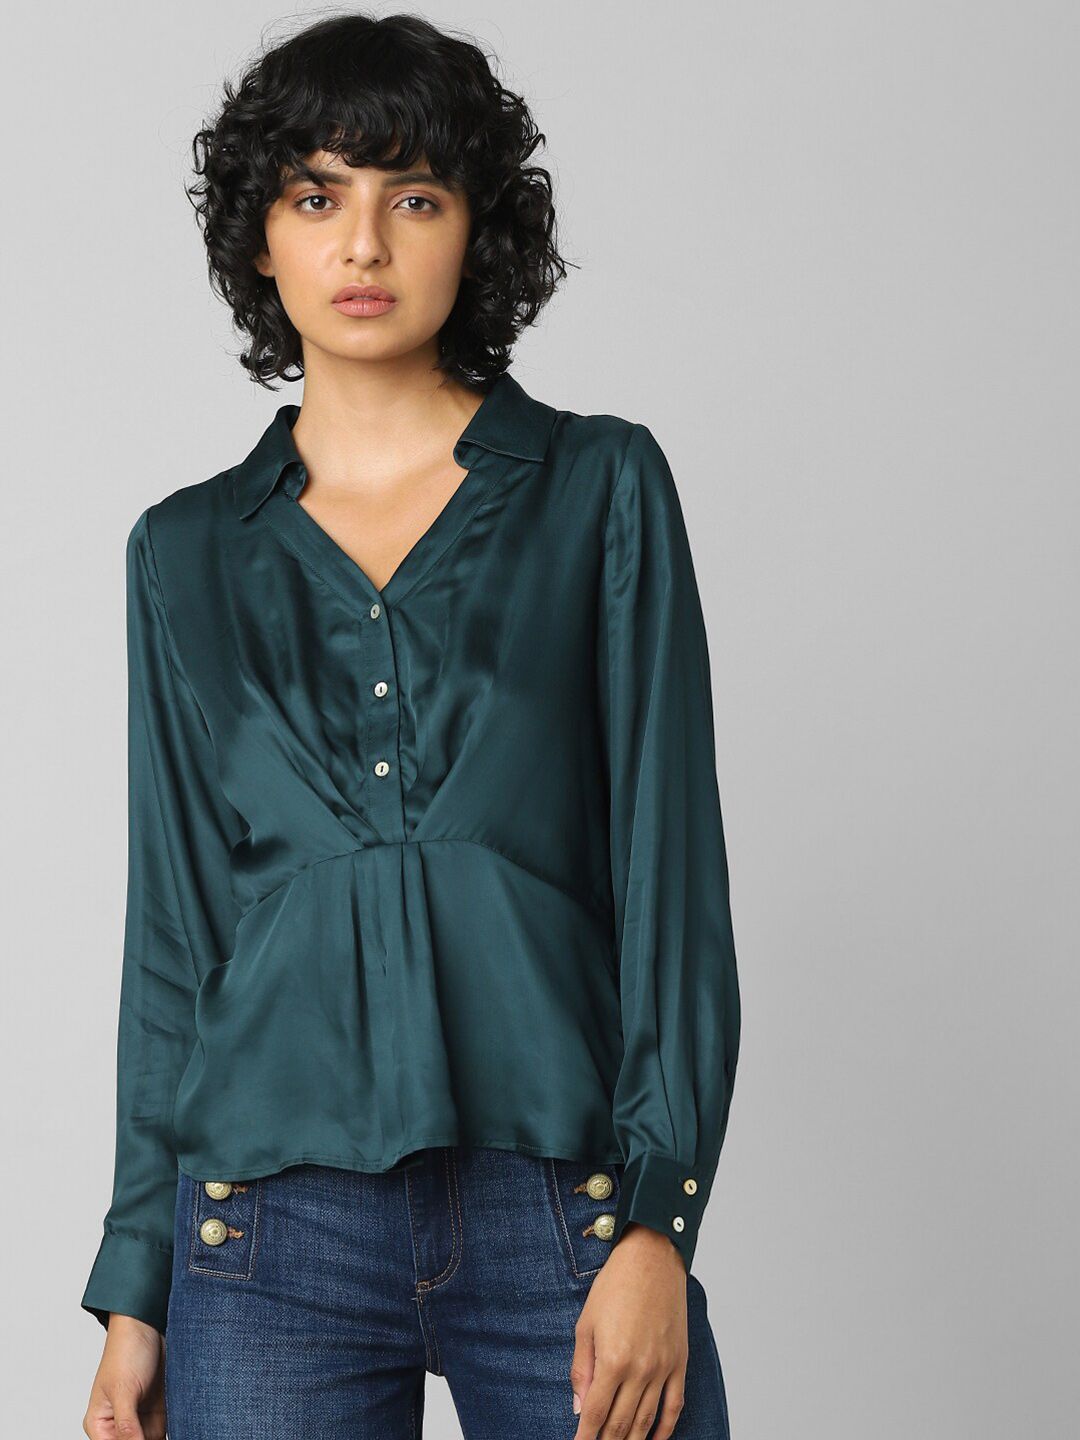 ONLY Women Green Solid Shirt Style Top Price in India